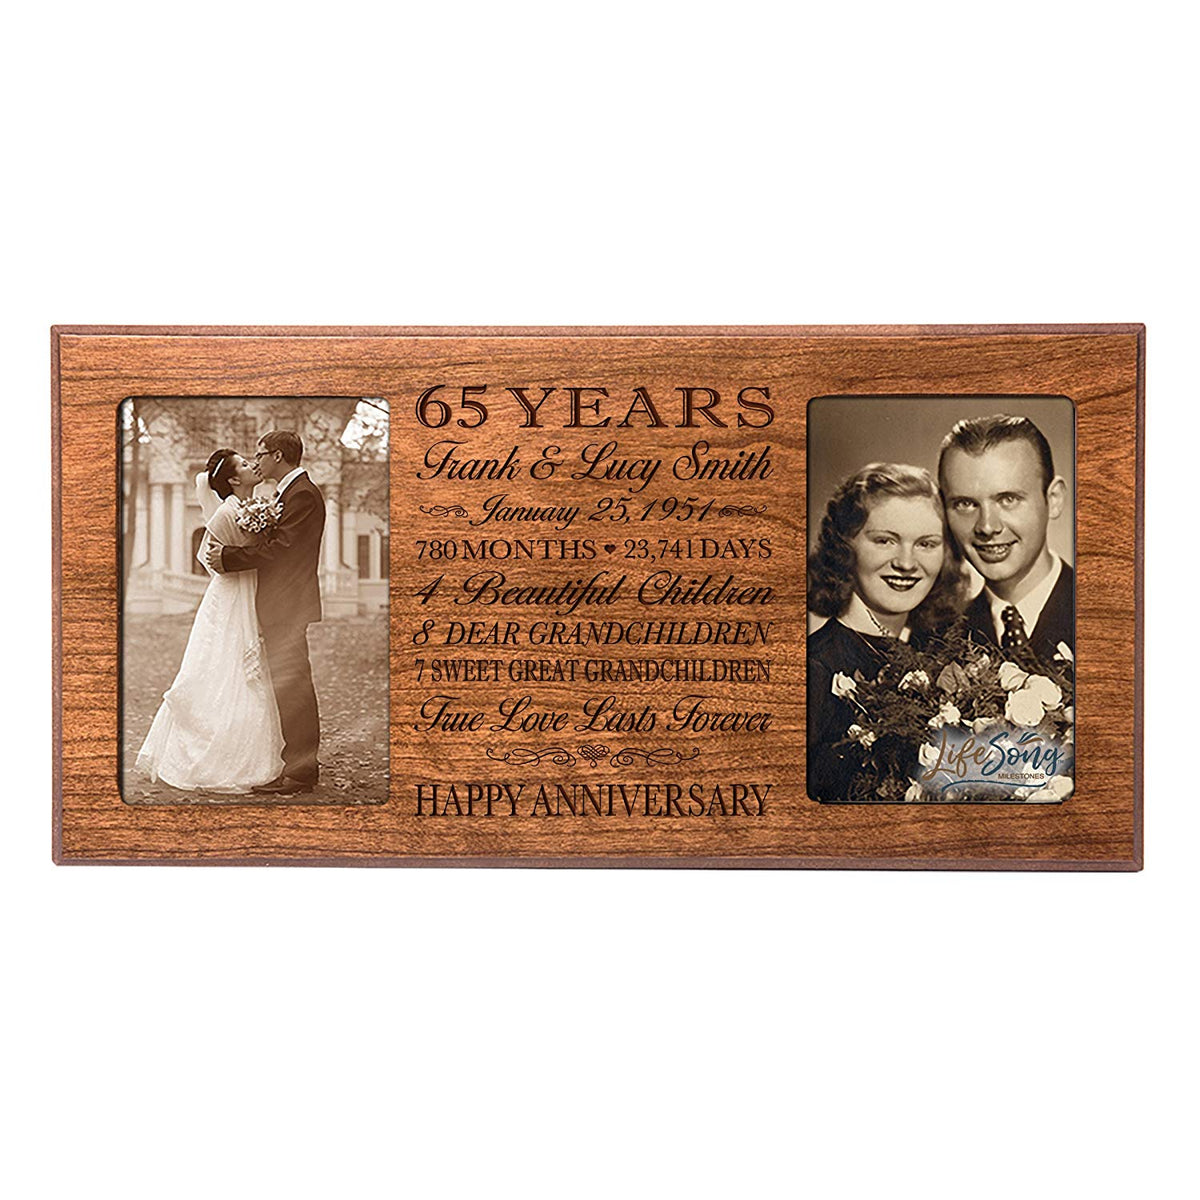 Personalized Anniversary Double Photo Frame - 65 Years - LifeSong Milestones